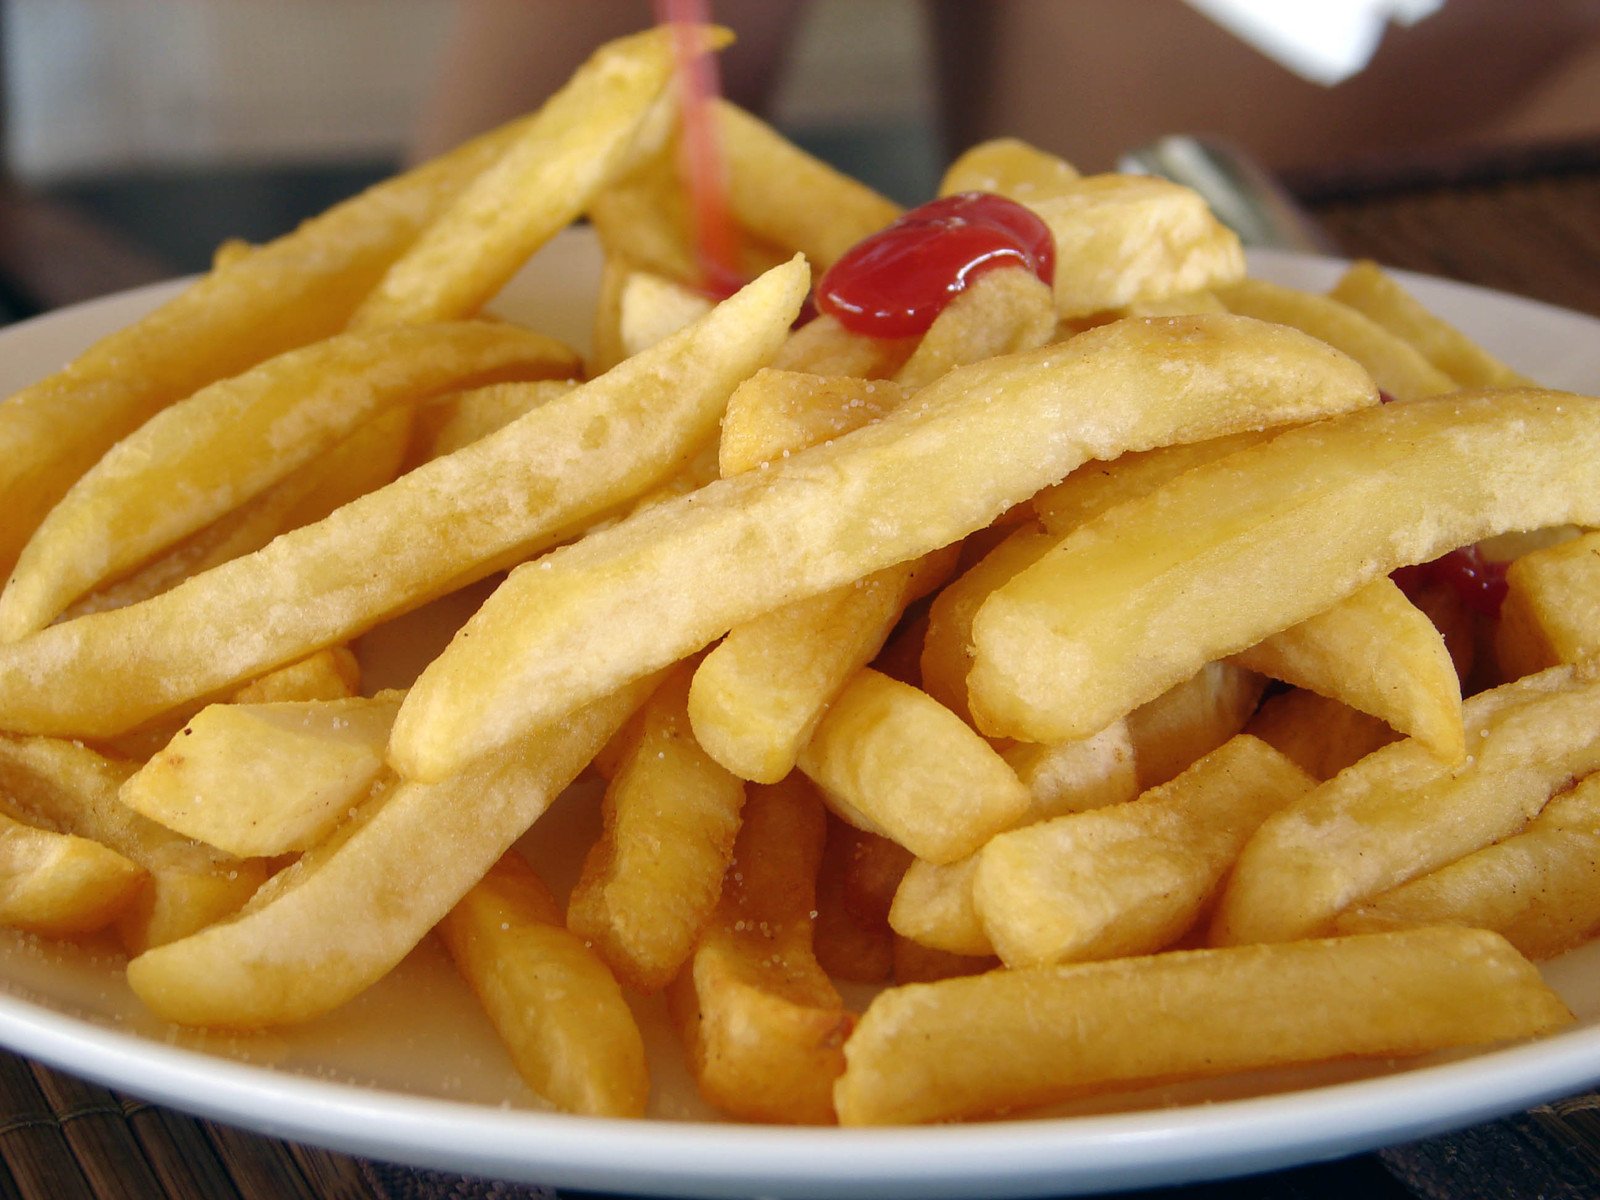 a close - up of french fries with ketchup and a cherry